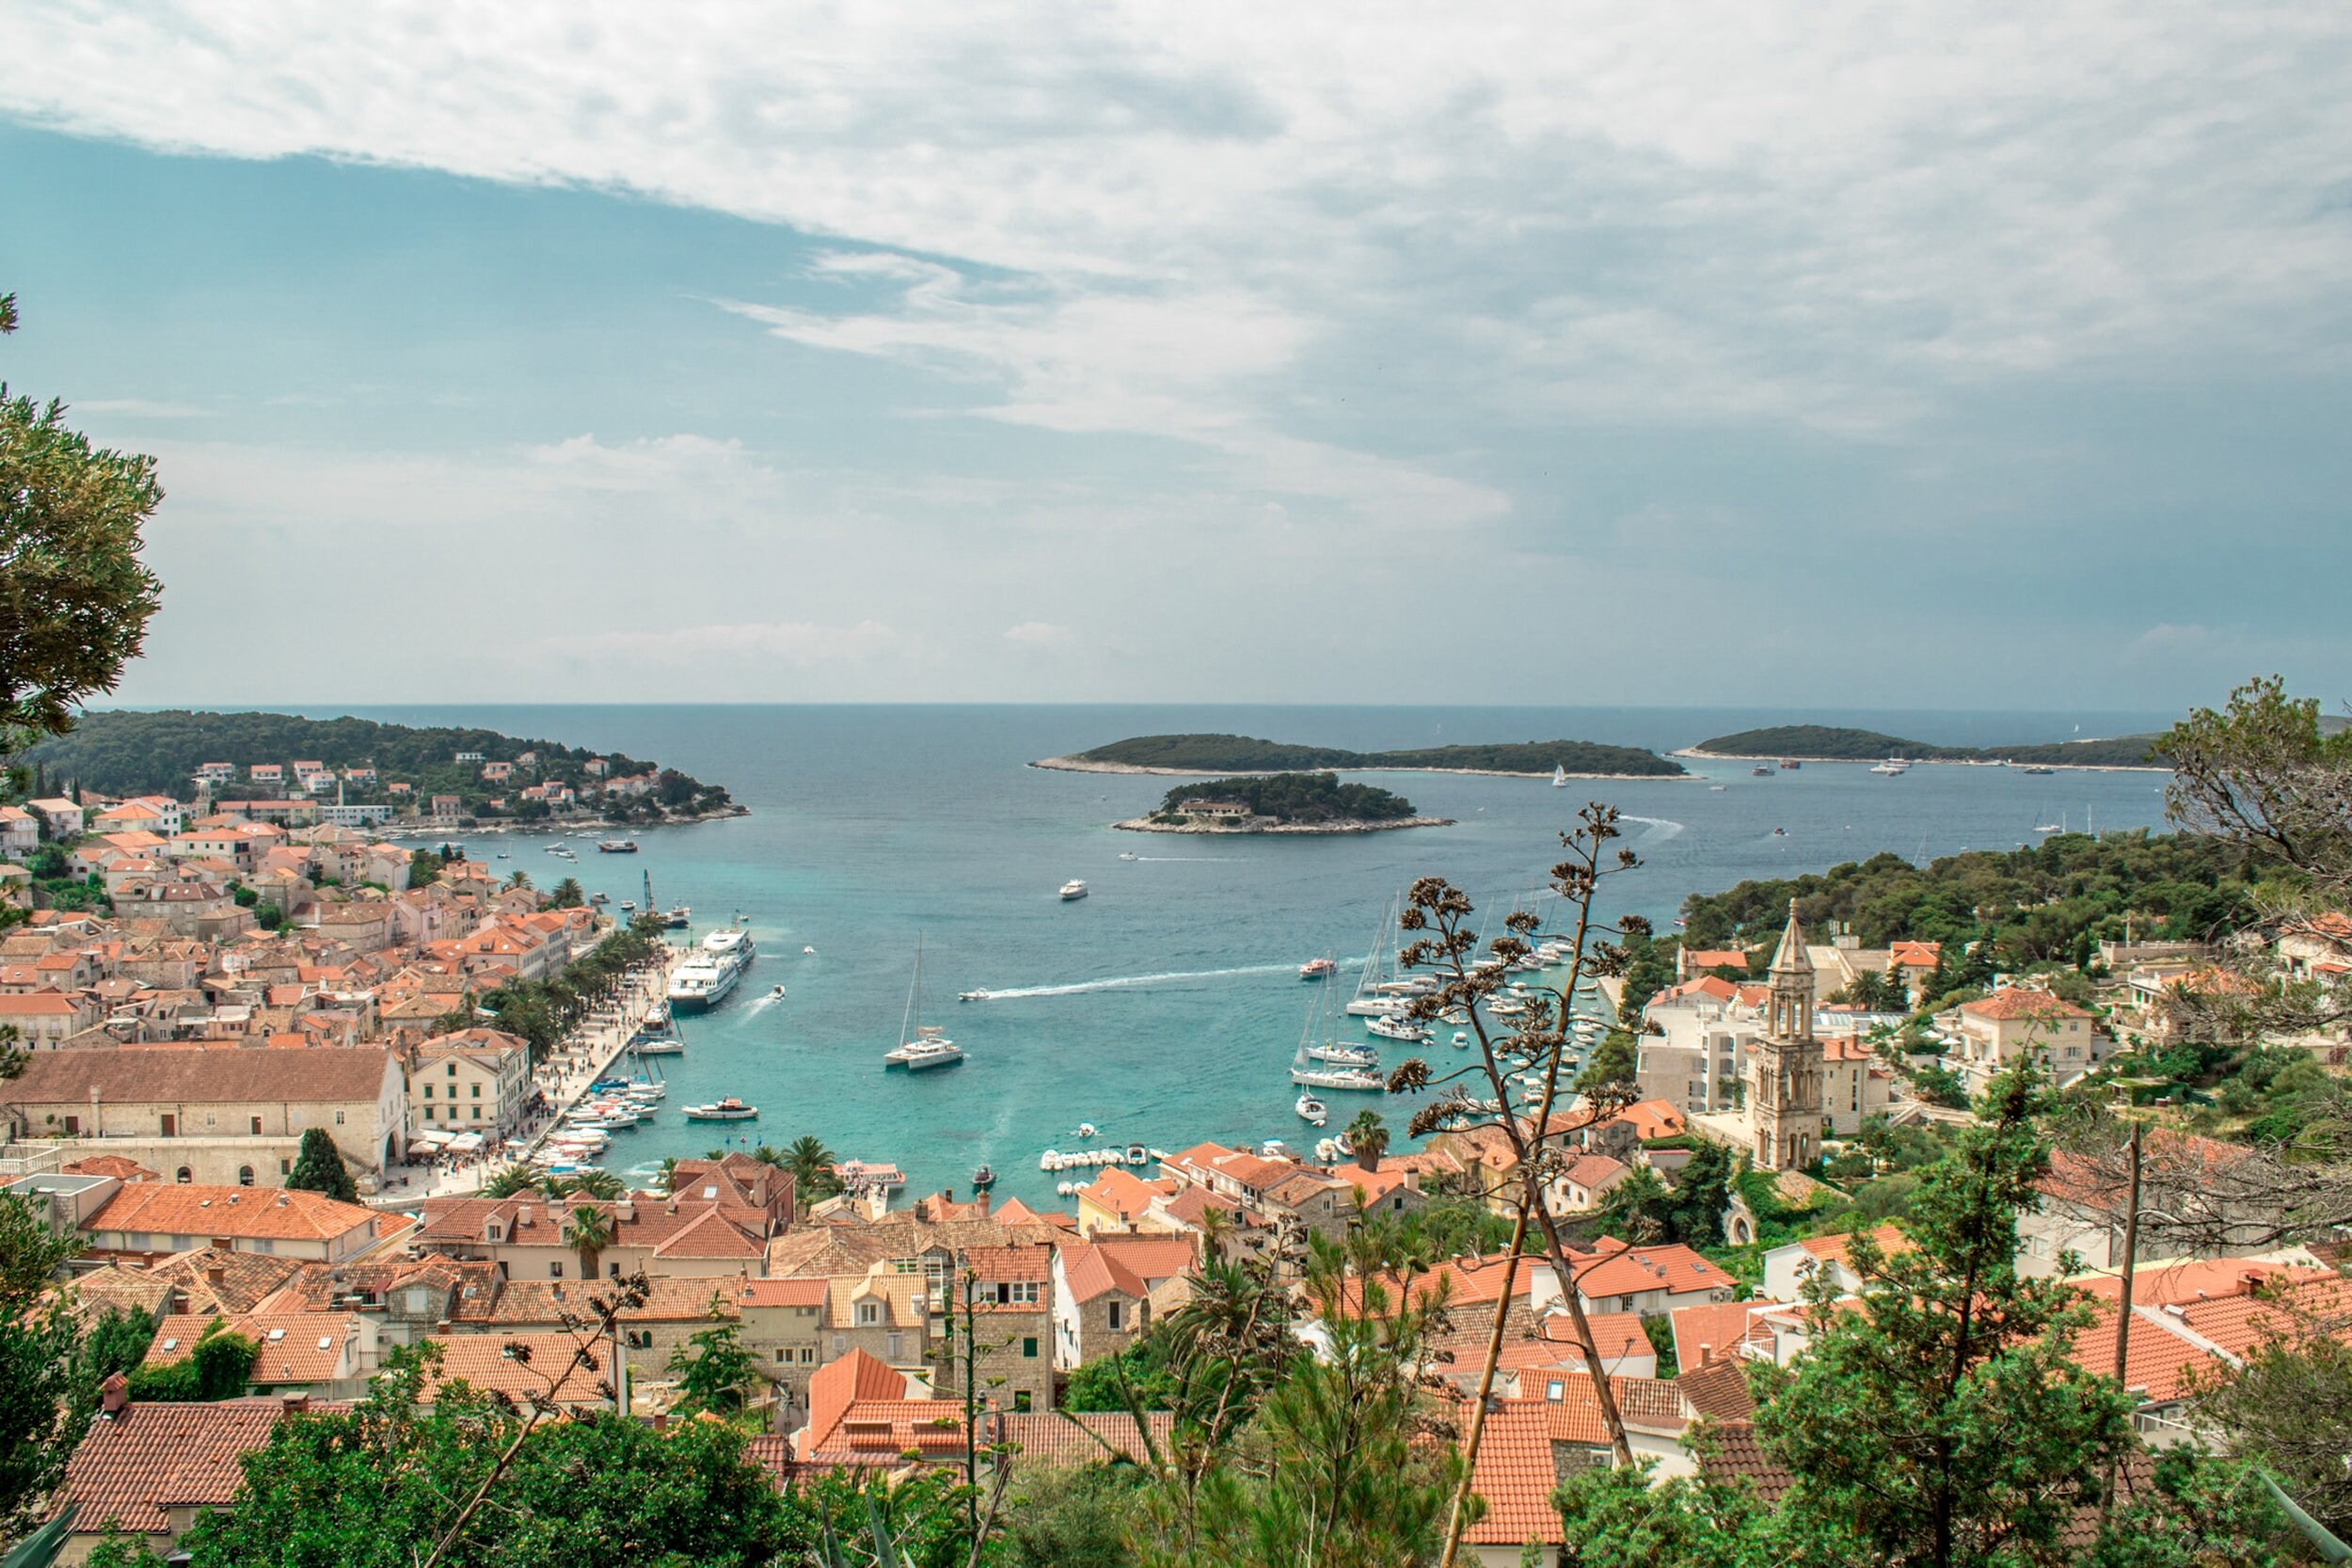 Hvar's charming old town and harbor, filled with boats and little islands, seen from a hill behind town.